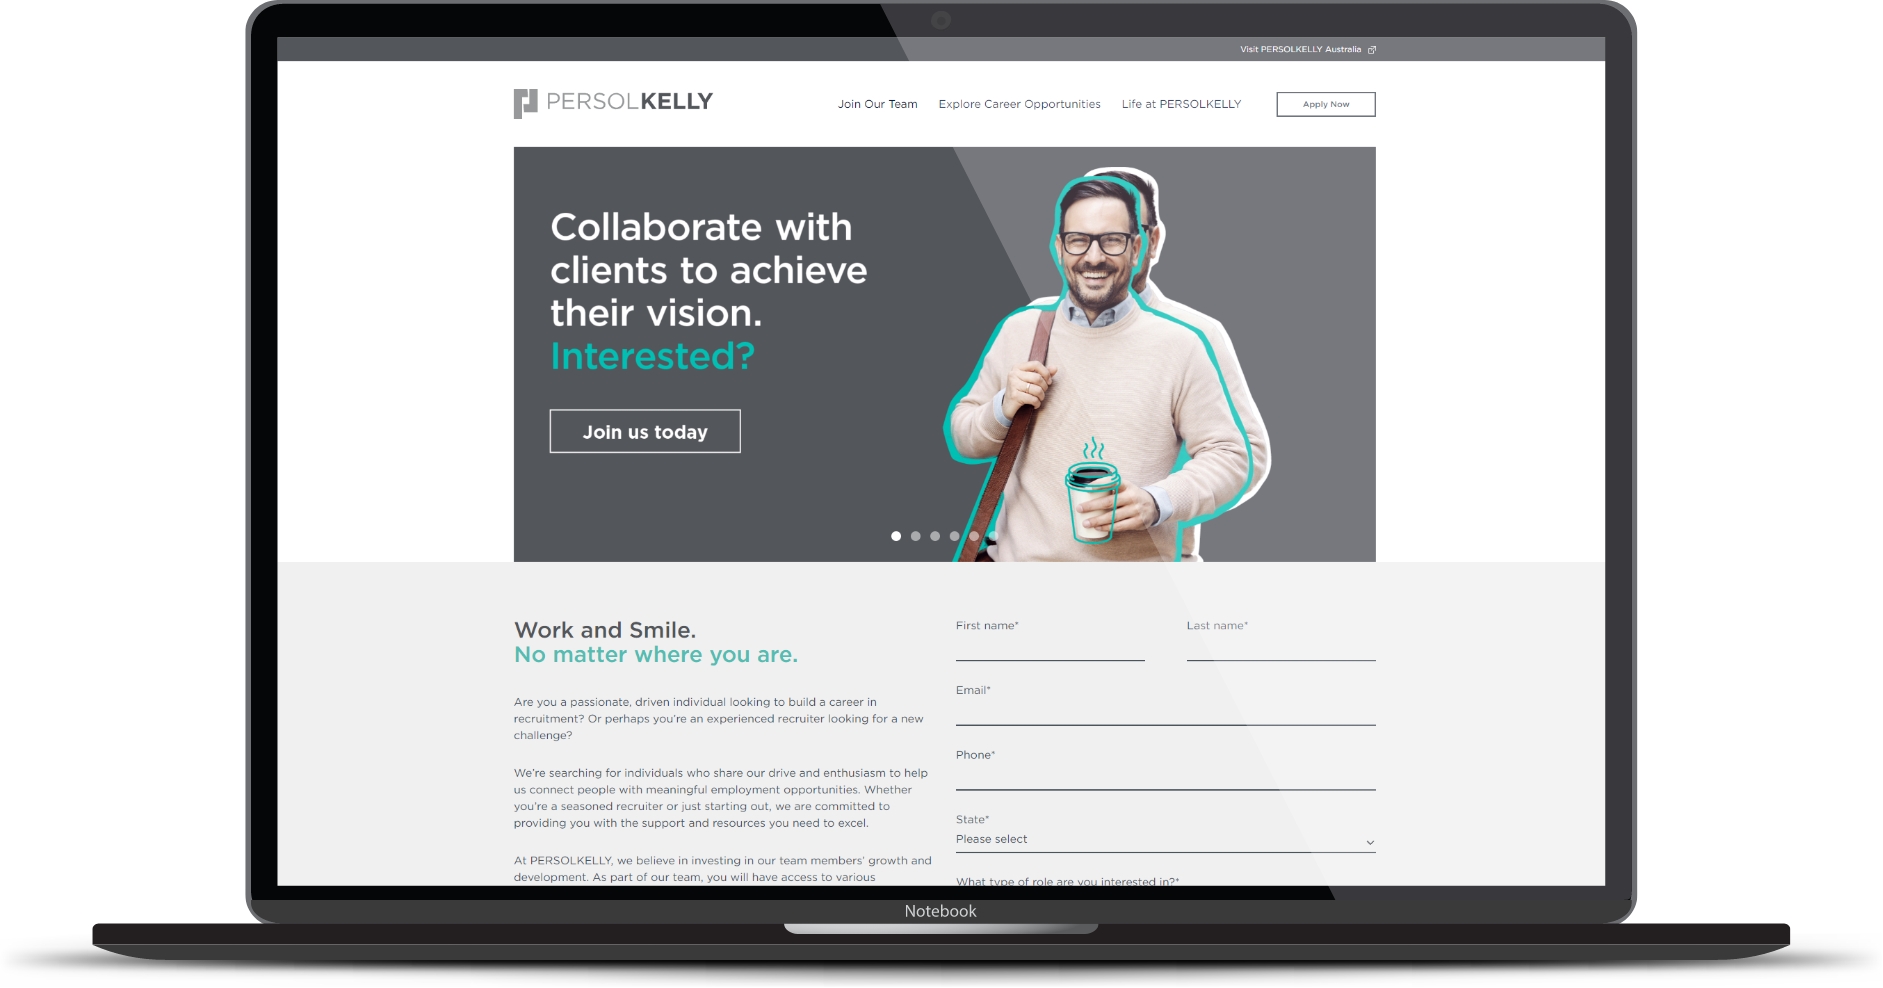 persolkelly careers case study